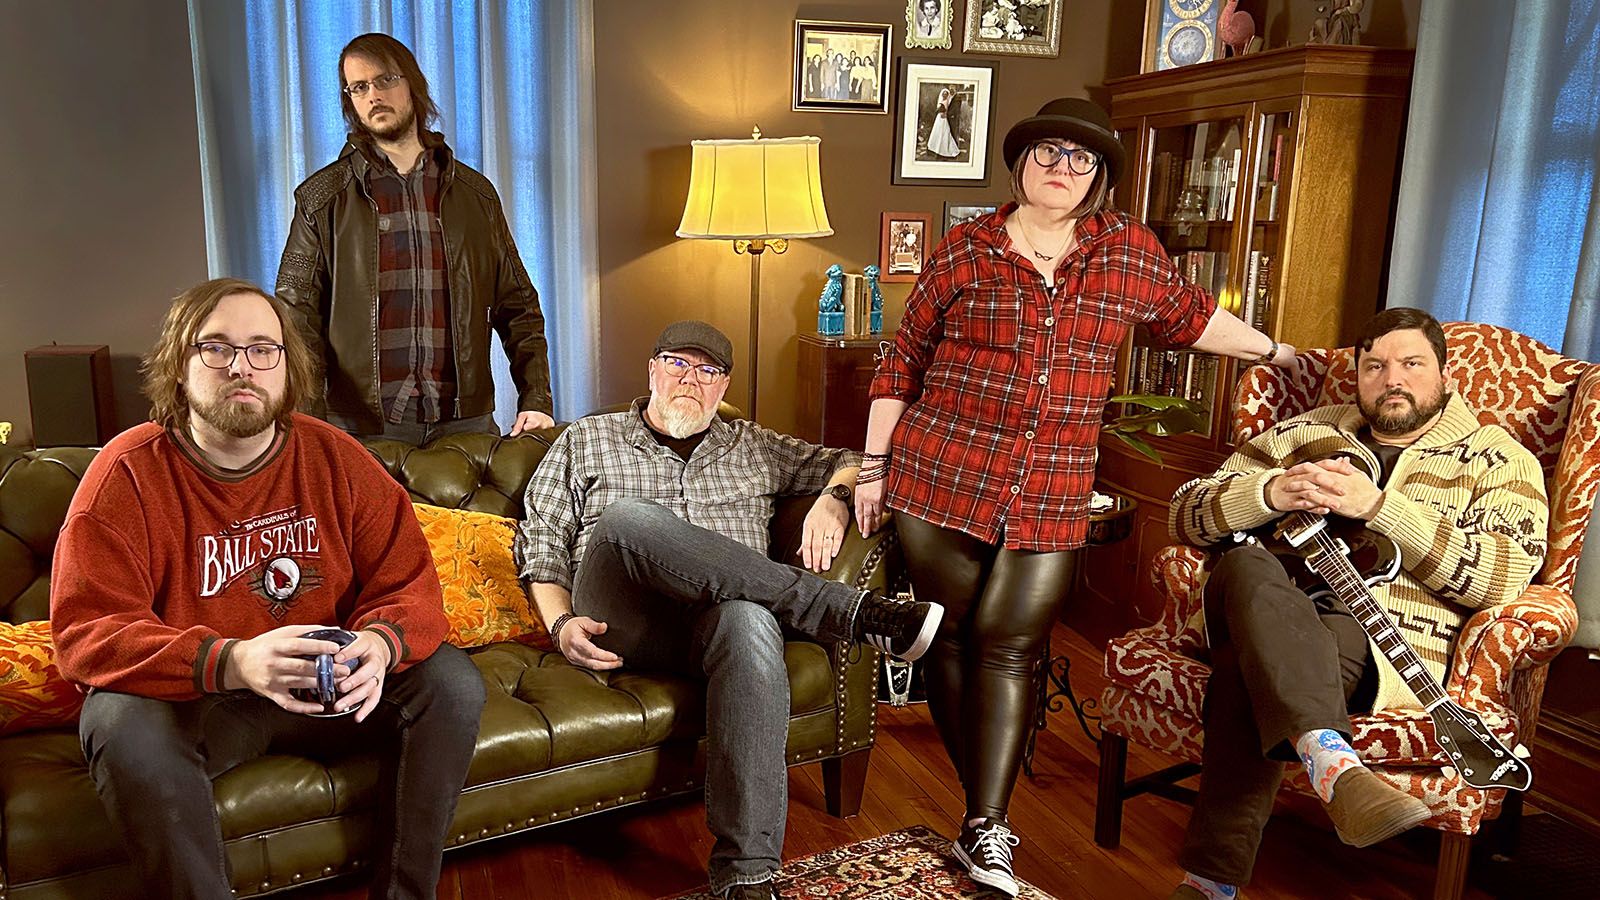 Humans Among Us, from left, Josh Kattner, Ashe Davidson, Aaron Steele, Carin Steele, and Jason Villarreal, recently released their first single off their upcoming album and are featured in the latest ALT Homegrown Spotlight.